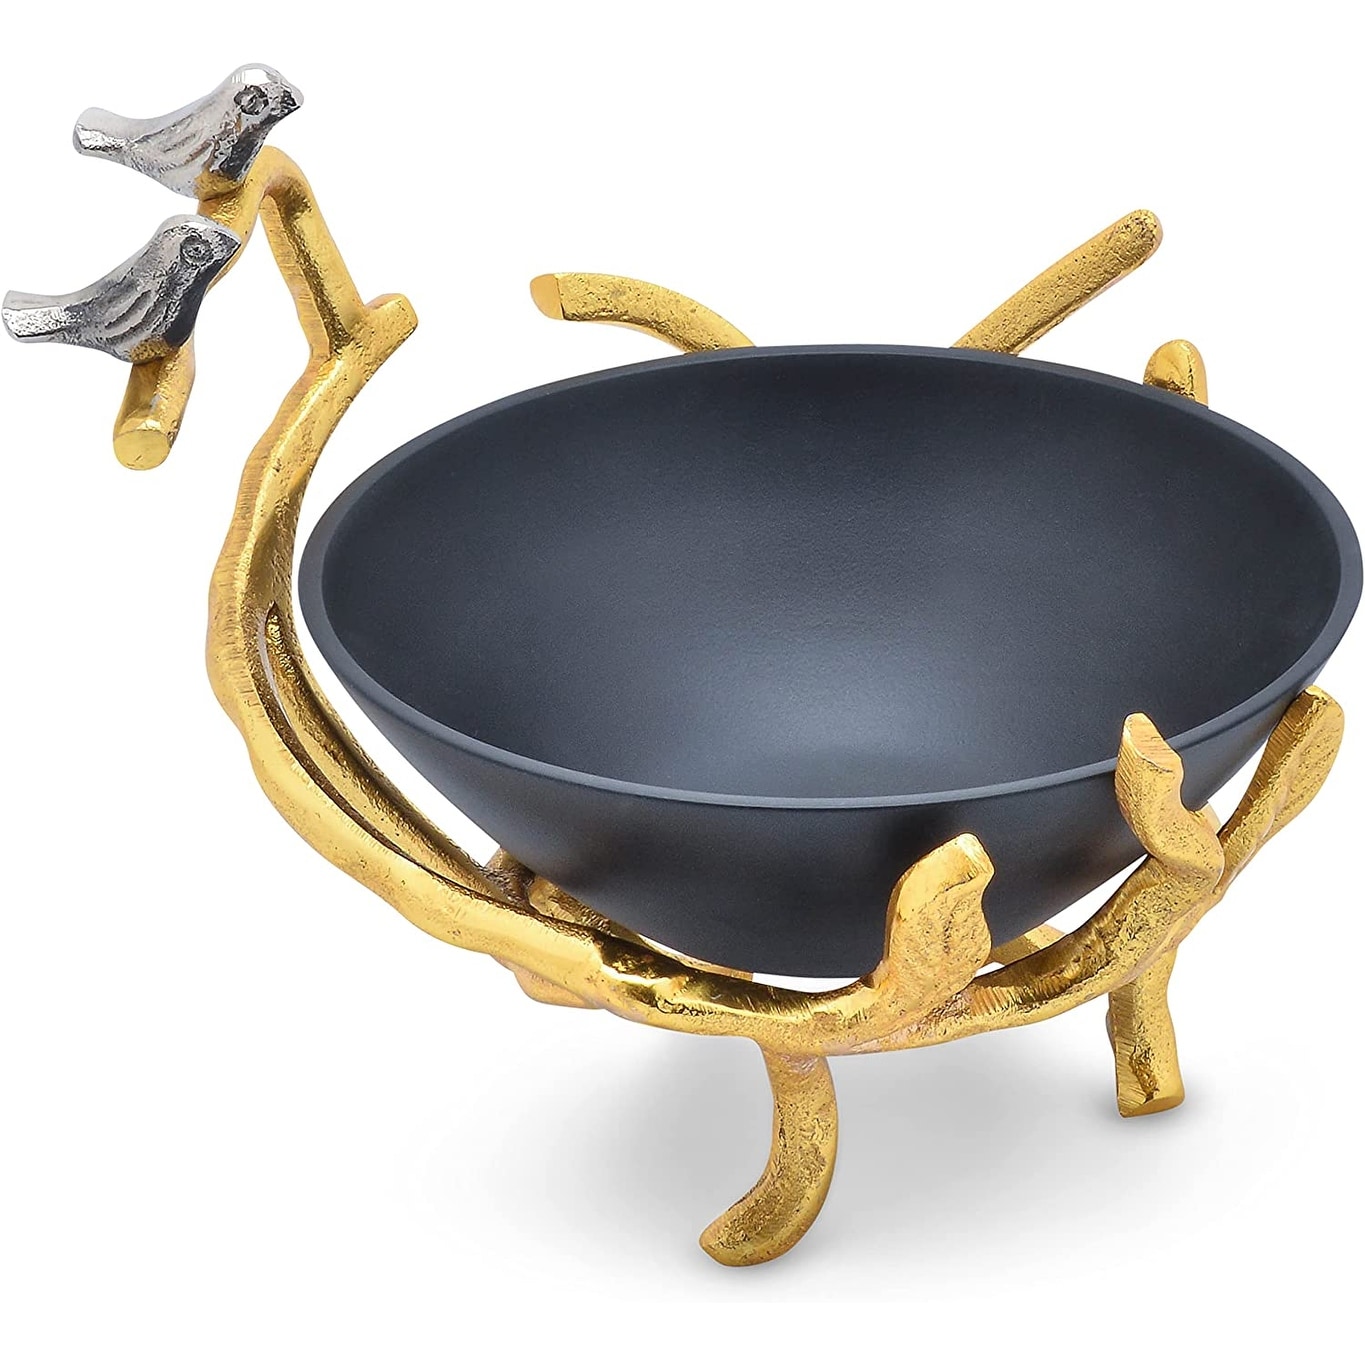 https://ak1.ostkcdn.com/images/products/is/images/direct/f208a00cd7c71b98930574cf4edc4e09ddbfed77/Cheer-Collection-Black-Decorative-Bowl-on-Gold-Branch-Stand-with-Silver-Birds.jpg